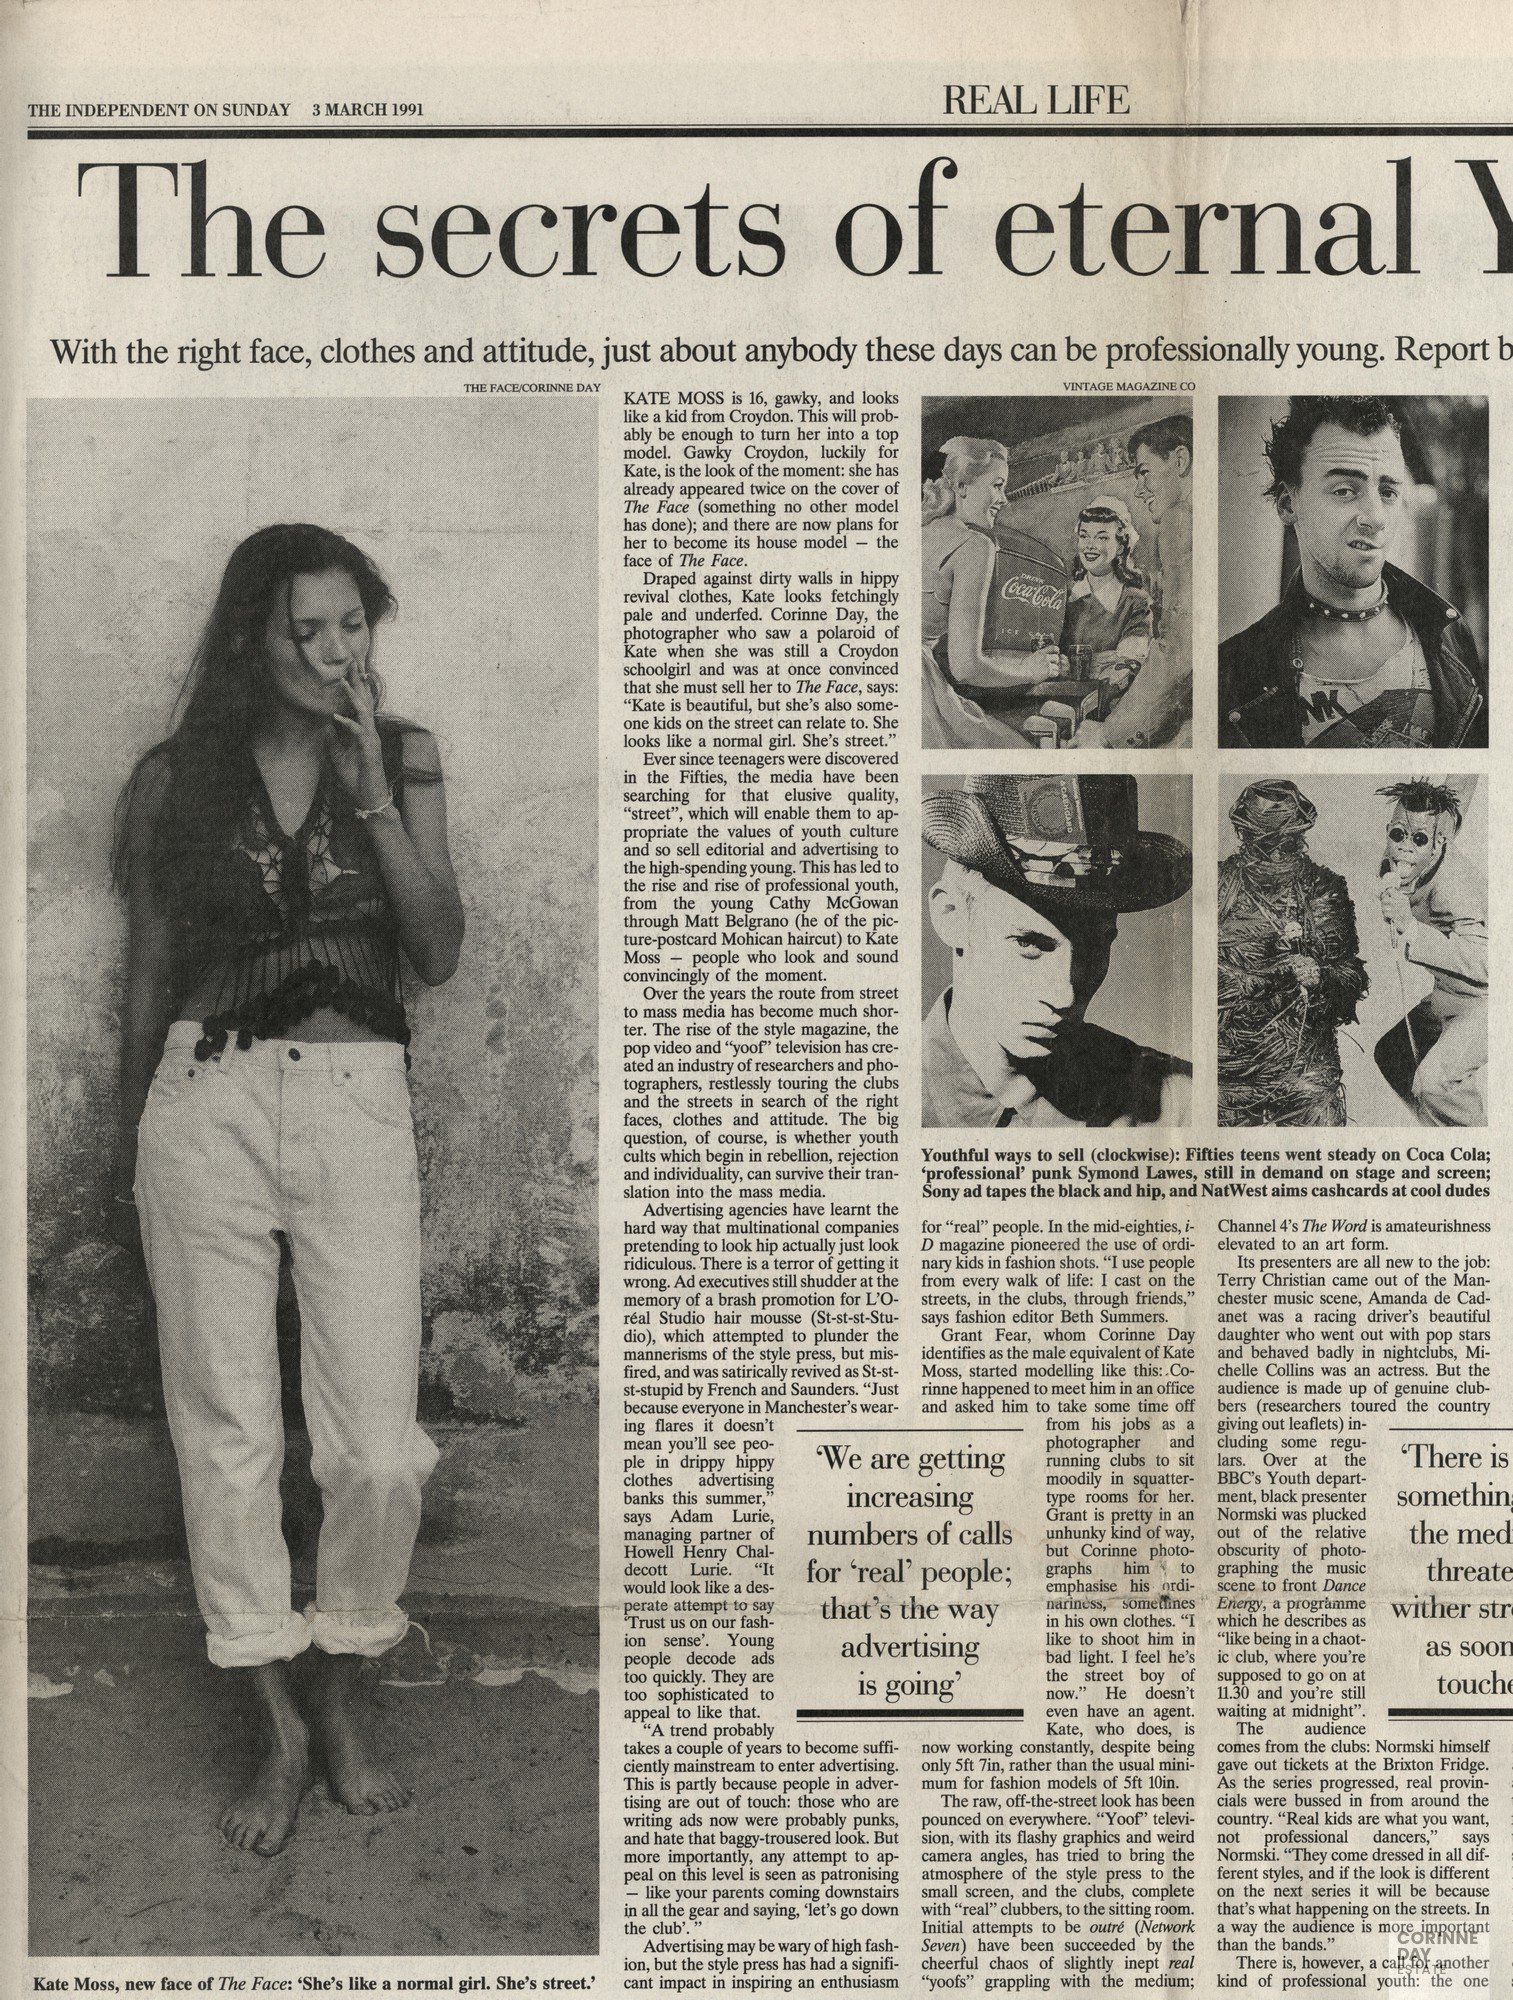 The secrets of eternal Yoof, The Independnent on Sunday, 3 Mar 1991 — Image 1 of 2